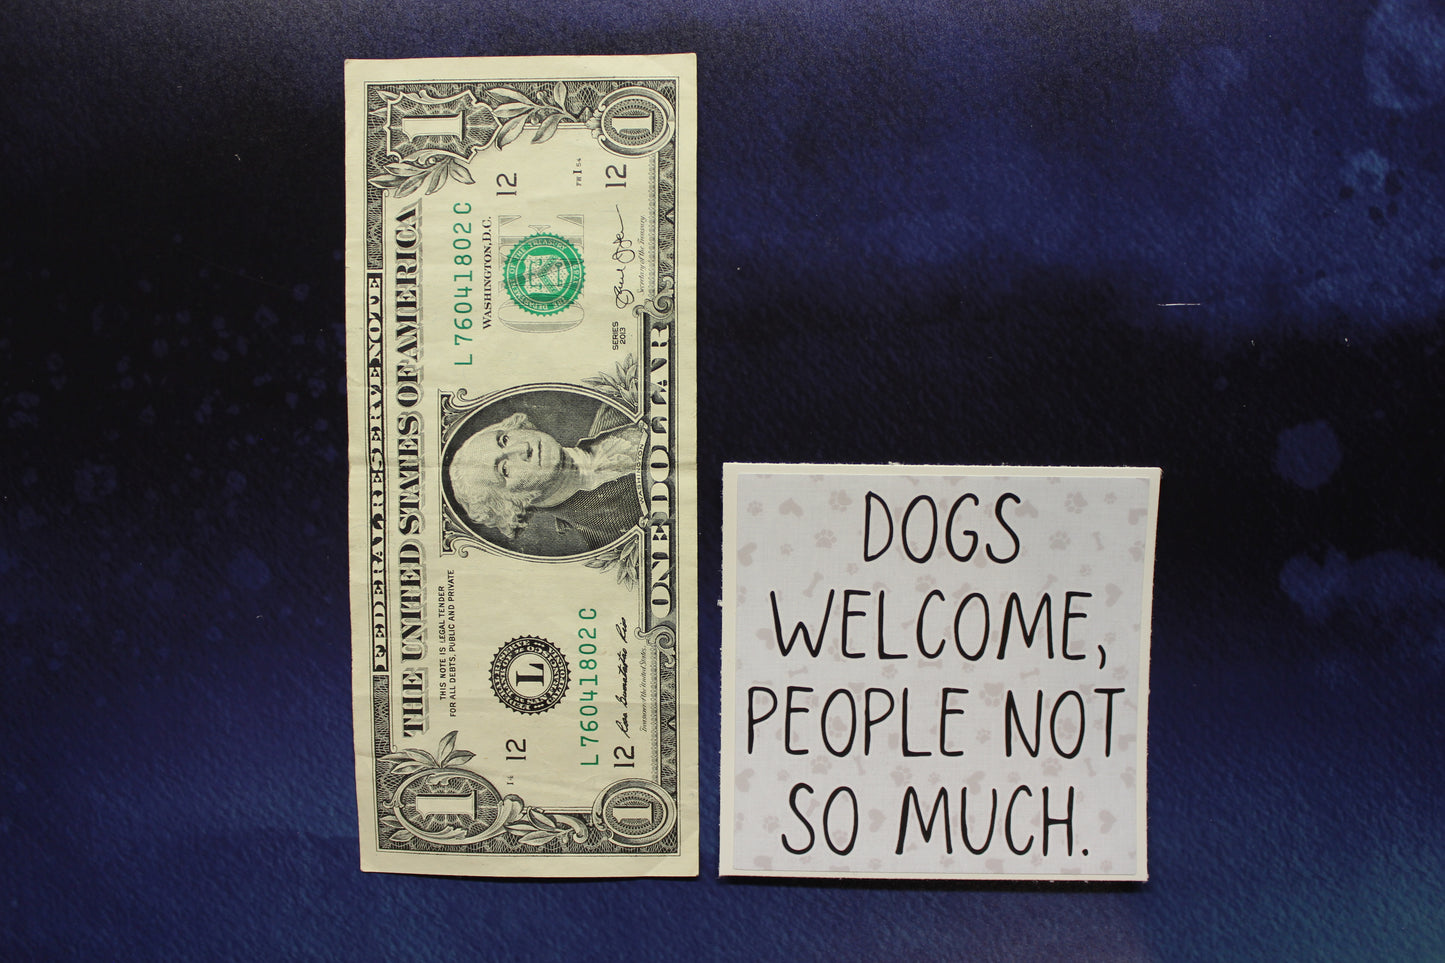 Dogs Welcome, People Not So Much Vinyl Sticker